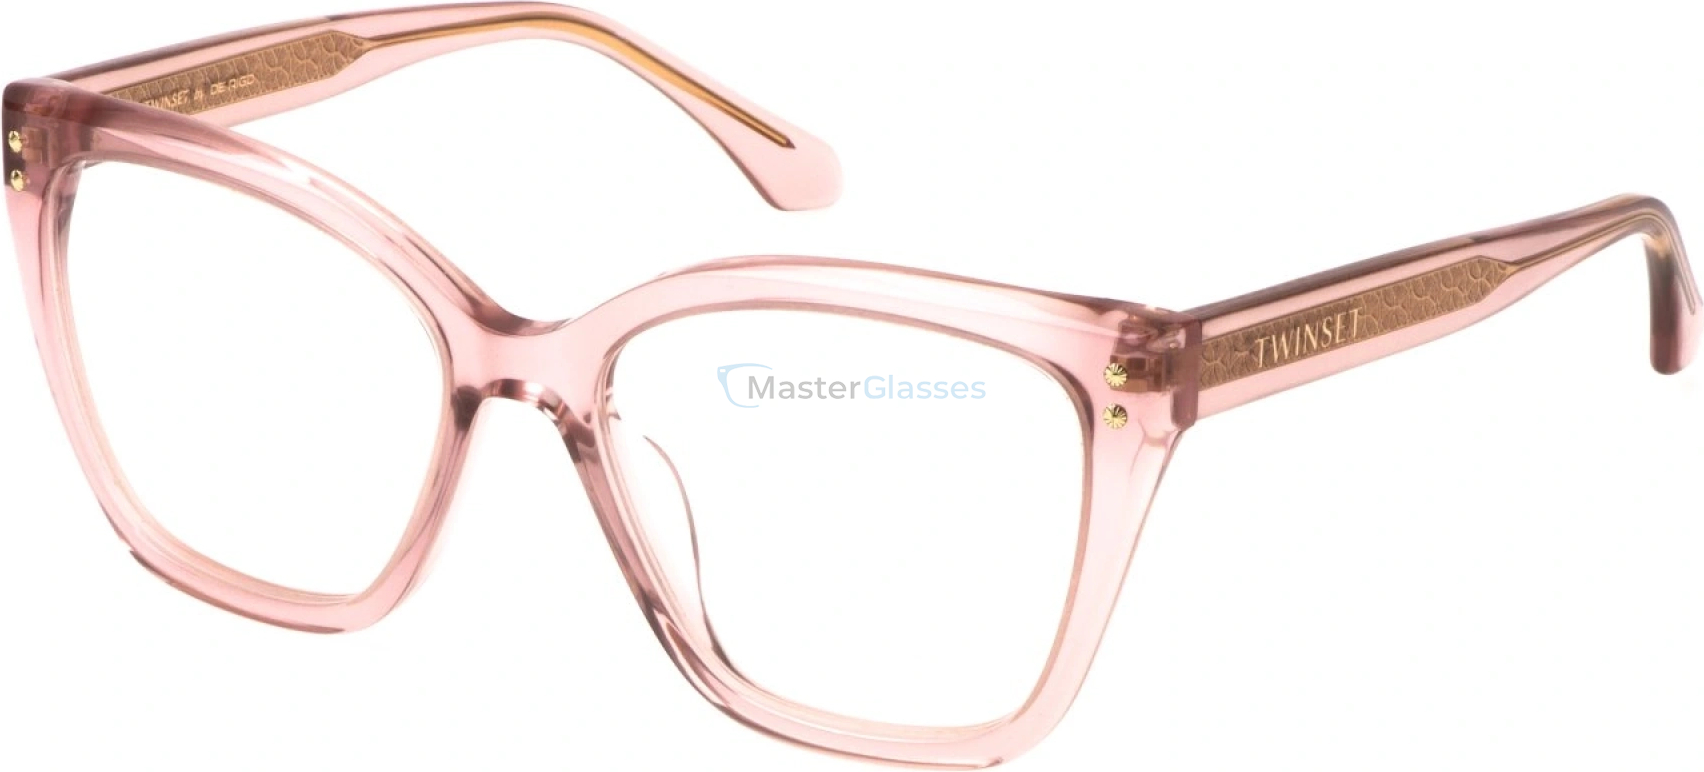  TWINSET VTW042 6MH,  SHINY TRANSP.PINK, CLEAR